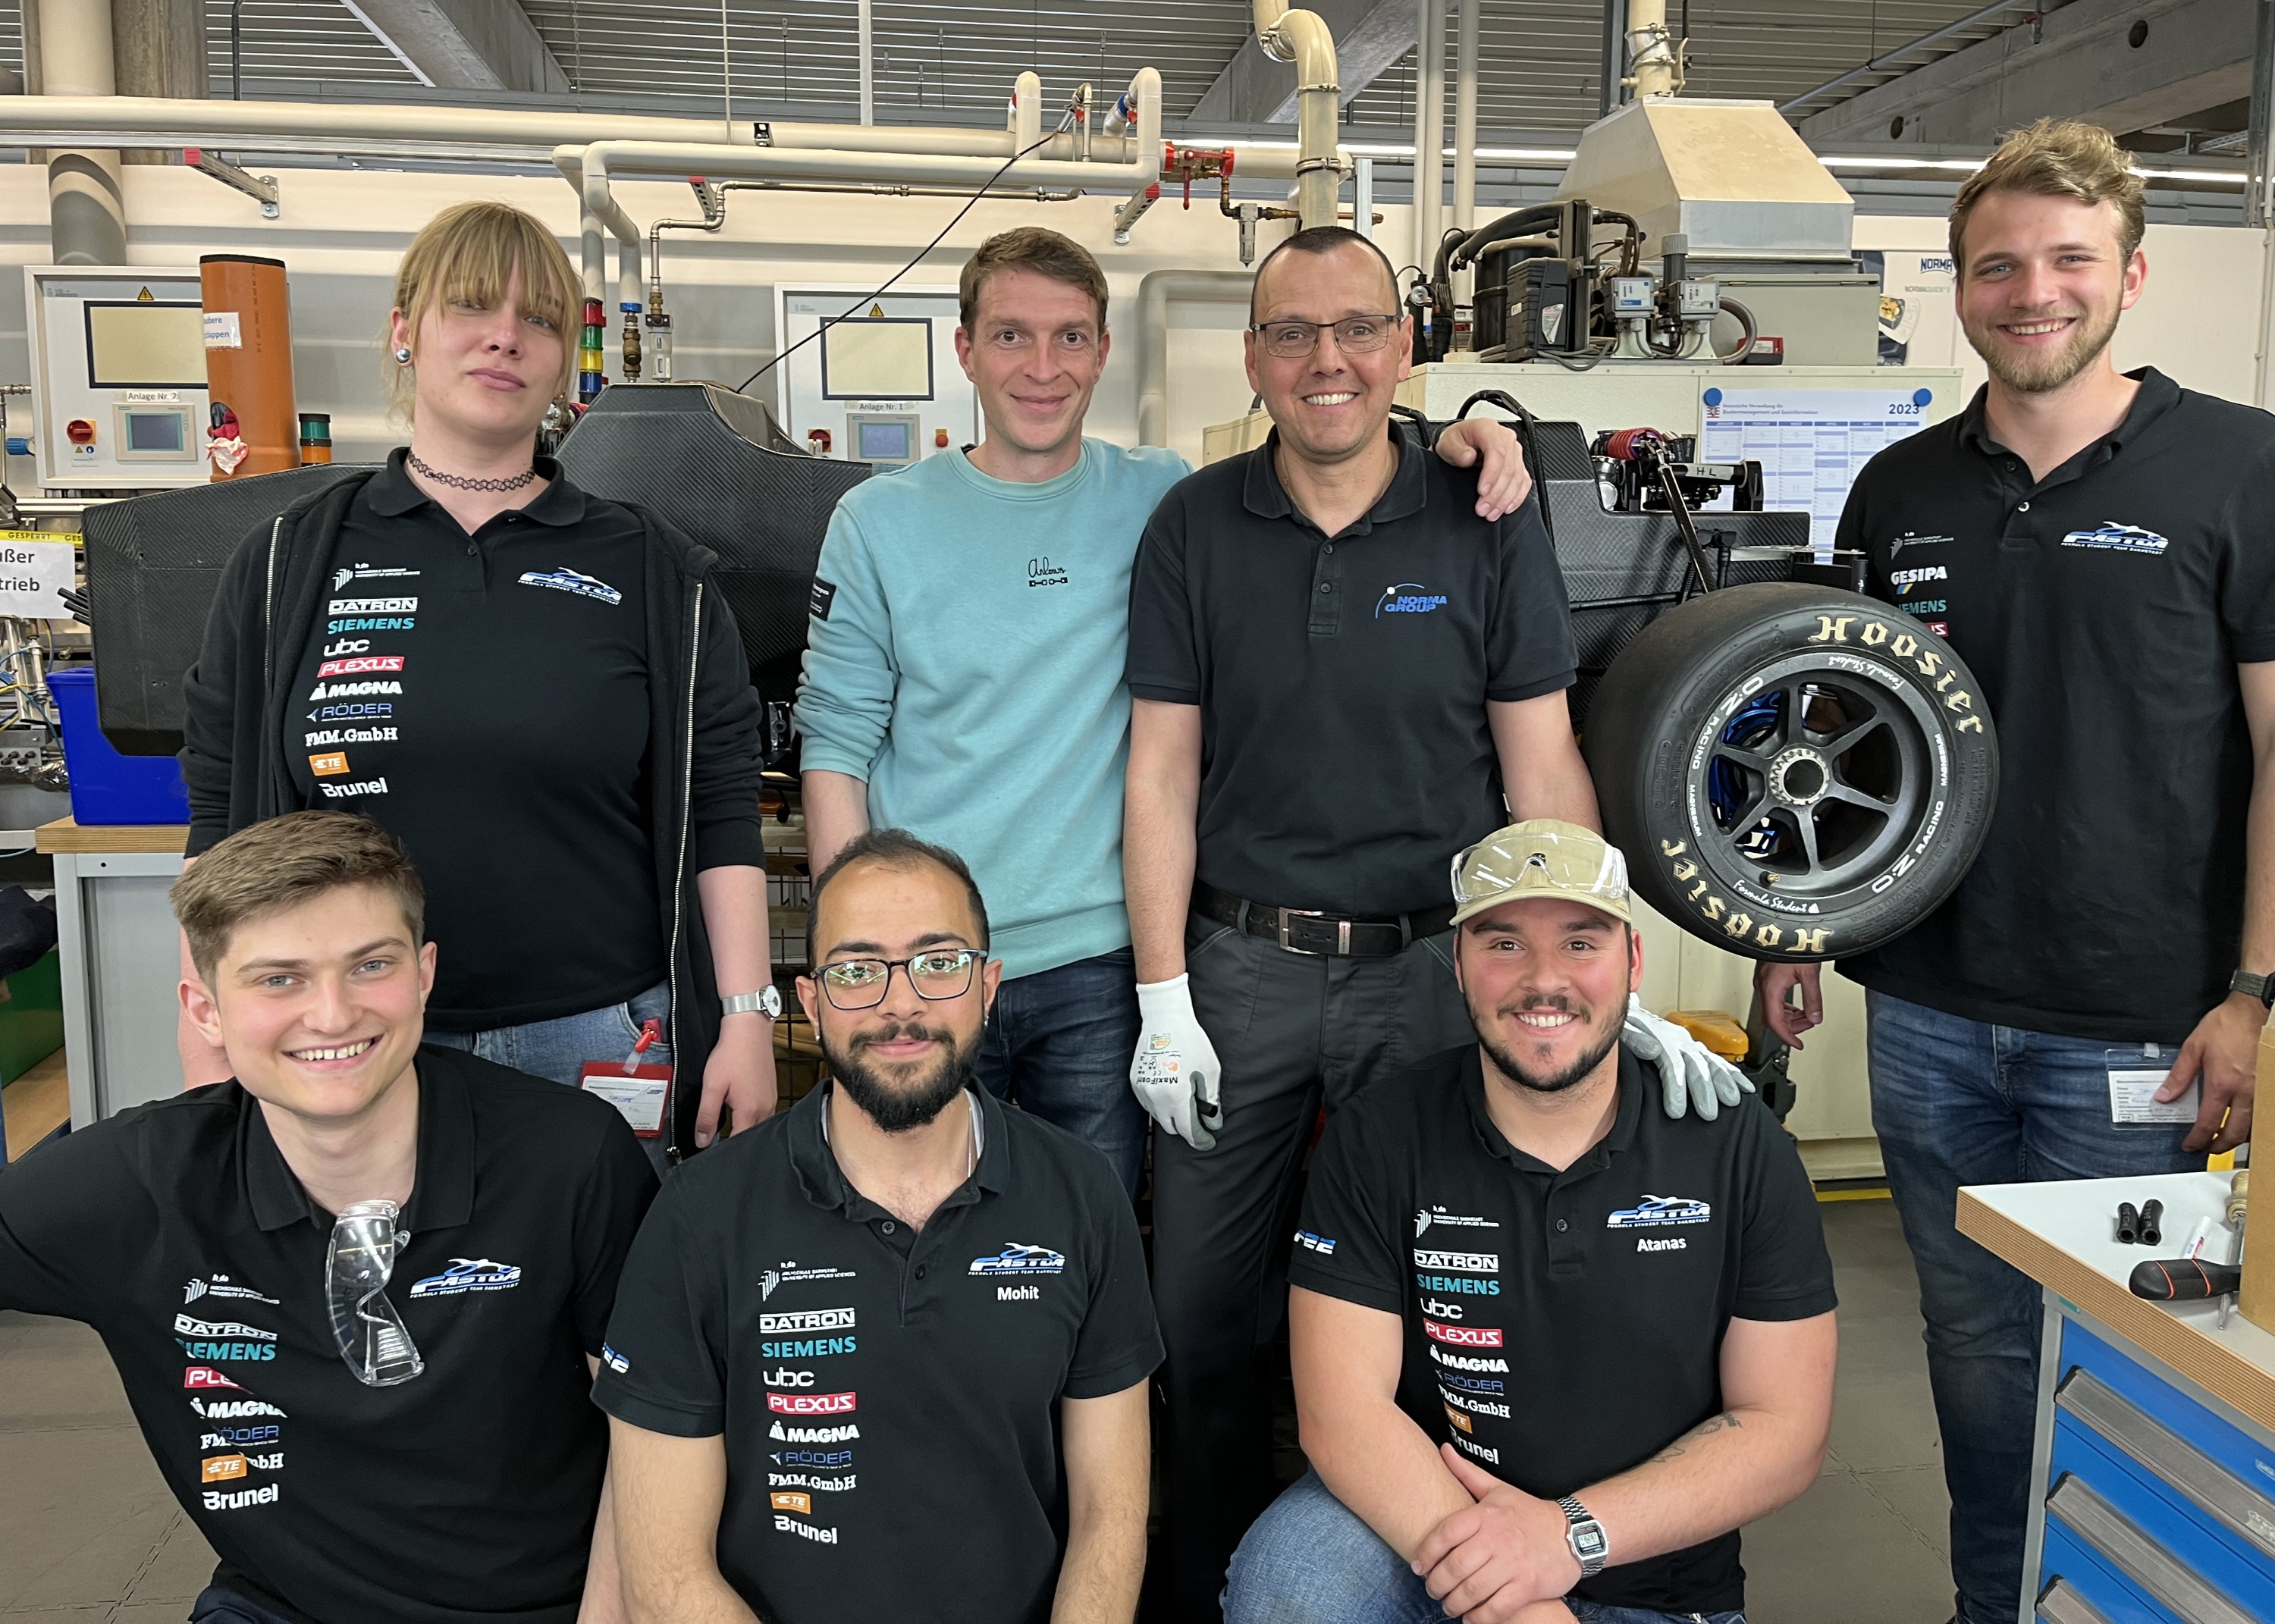 Members of the FaSTDa student racing team received support from NORMA Group employees during installation.